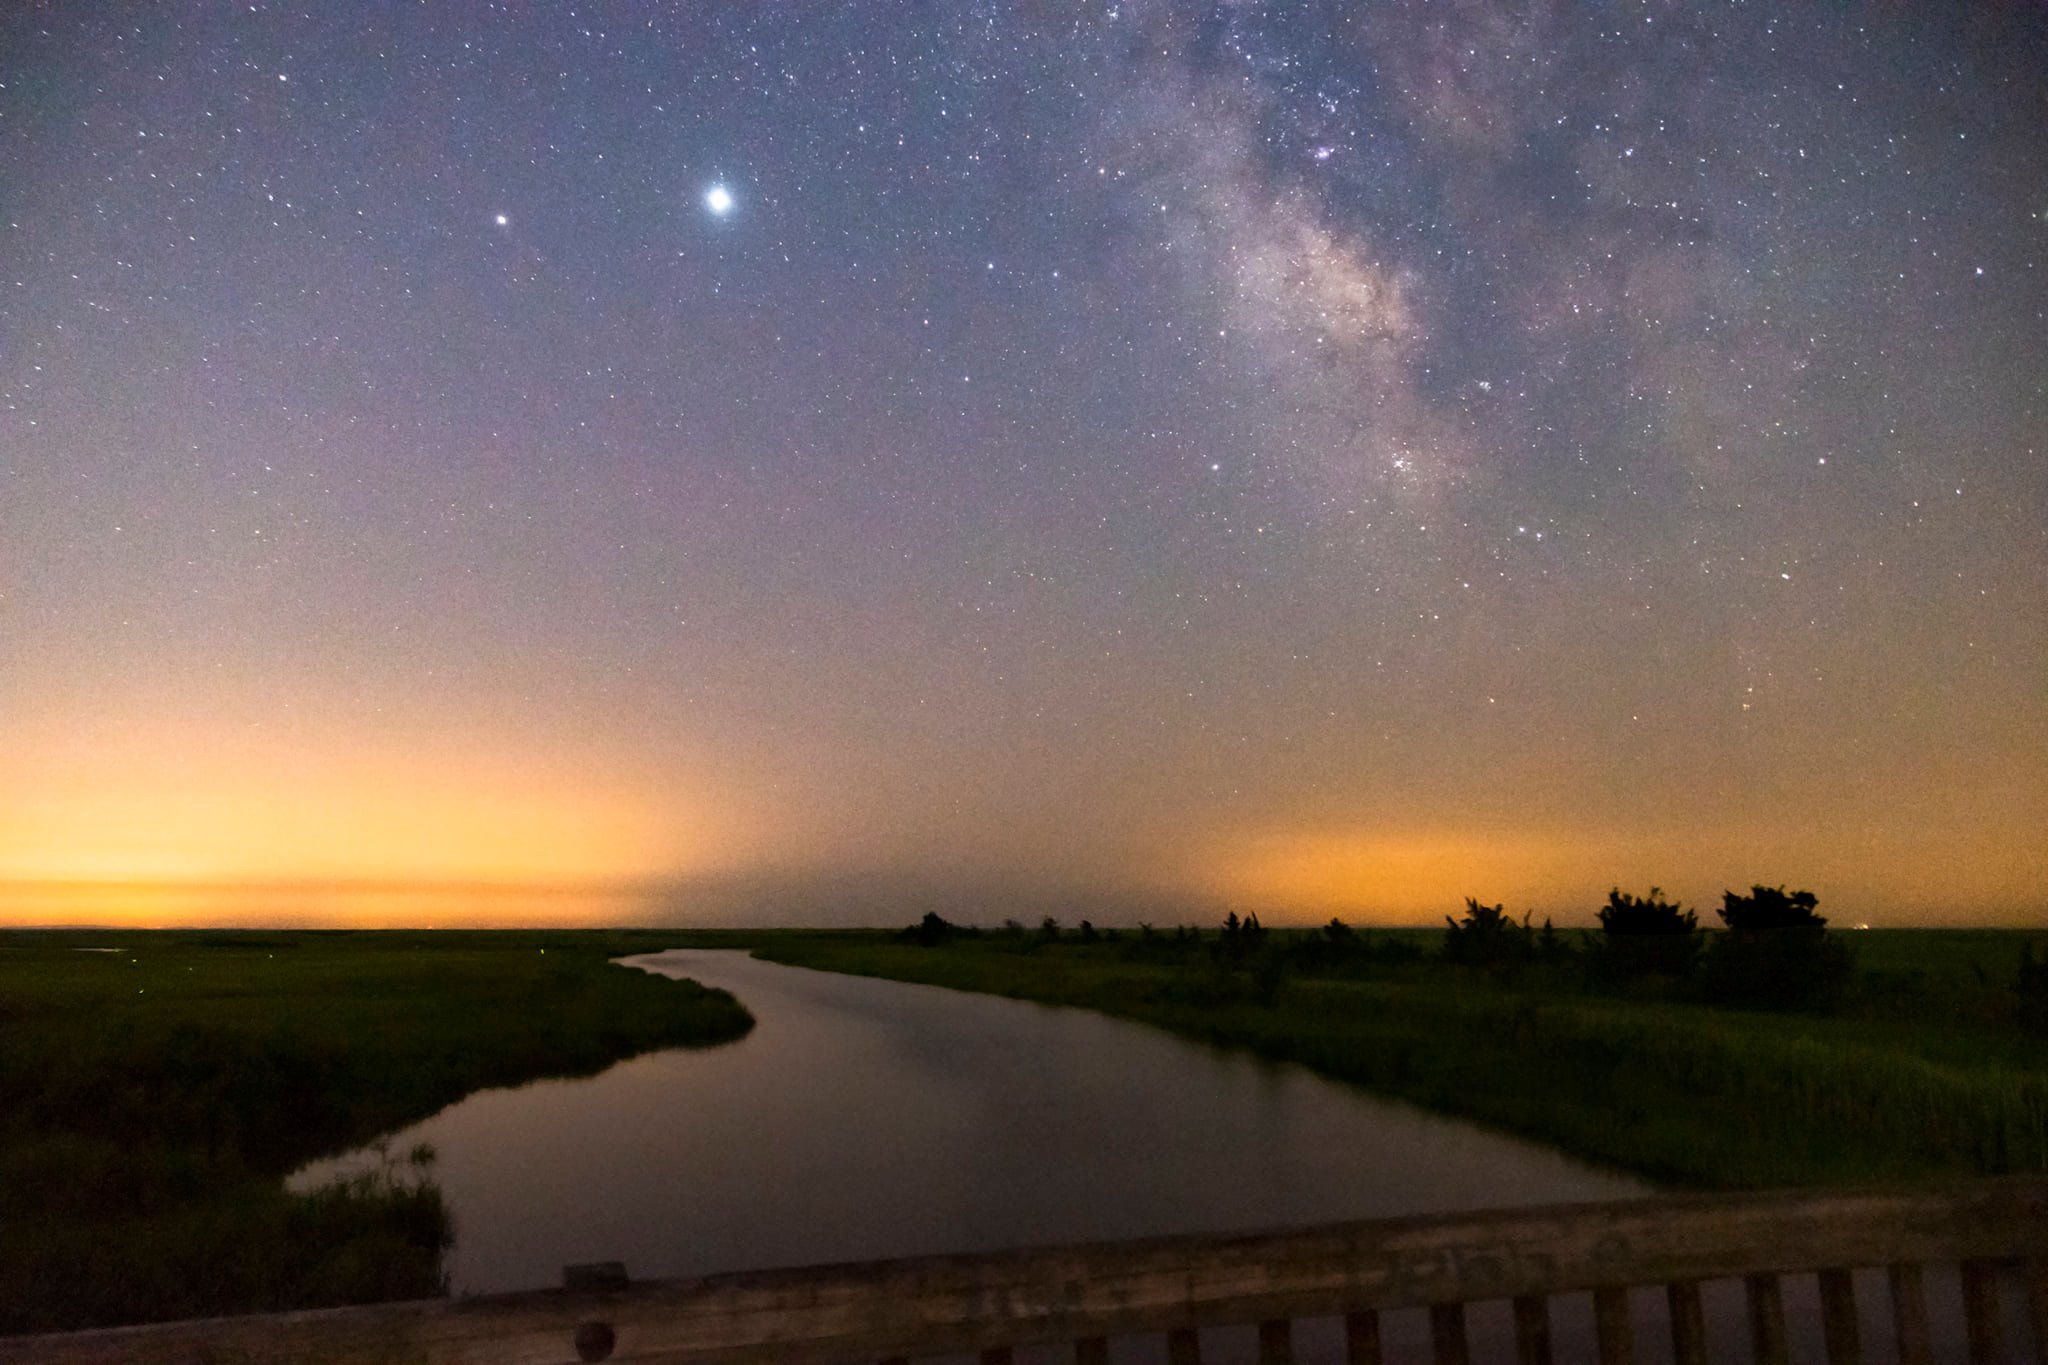 Two bright planets shine in a sky full of stars. The dusty arm of the Milky Way and the Delaware River are also visible.